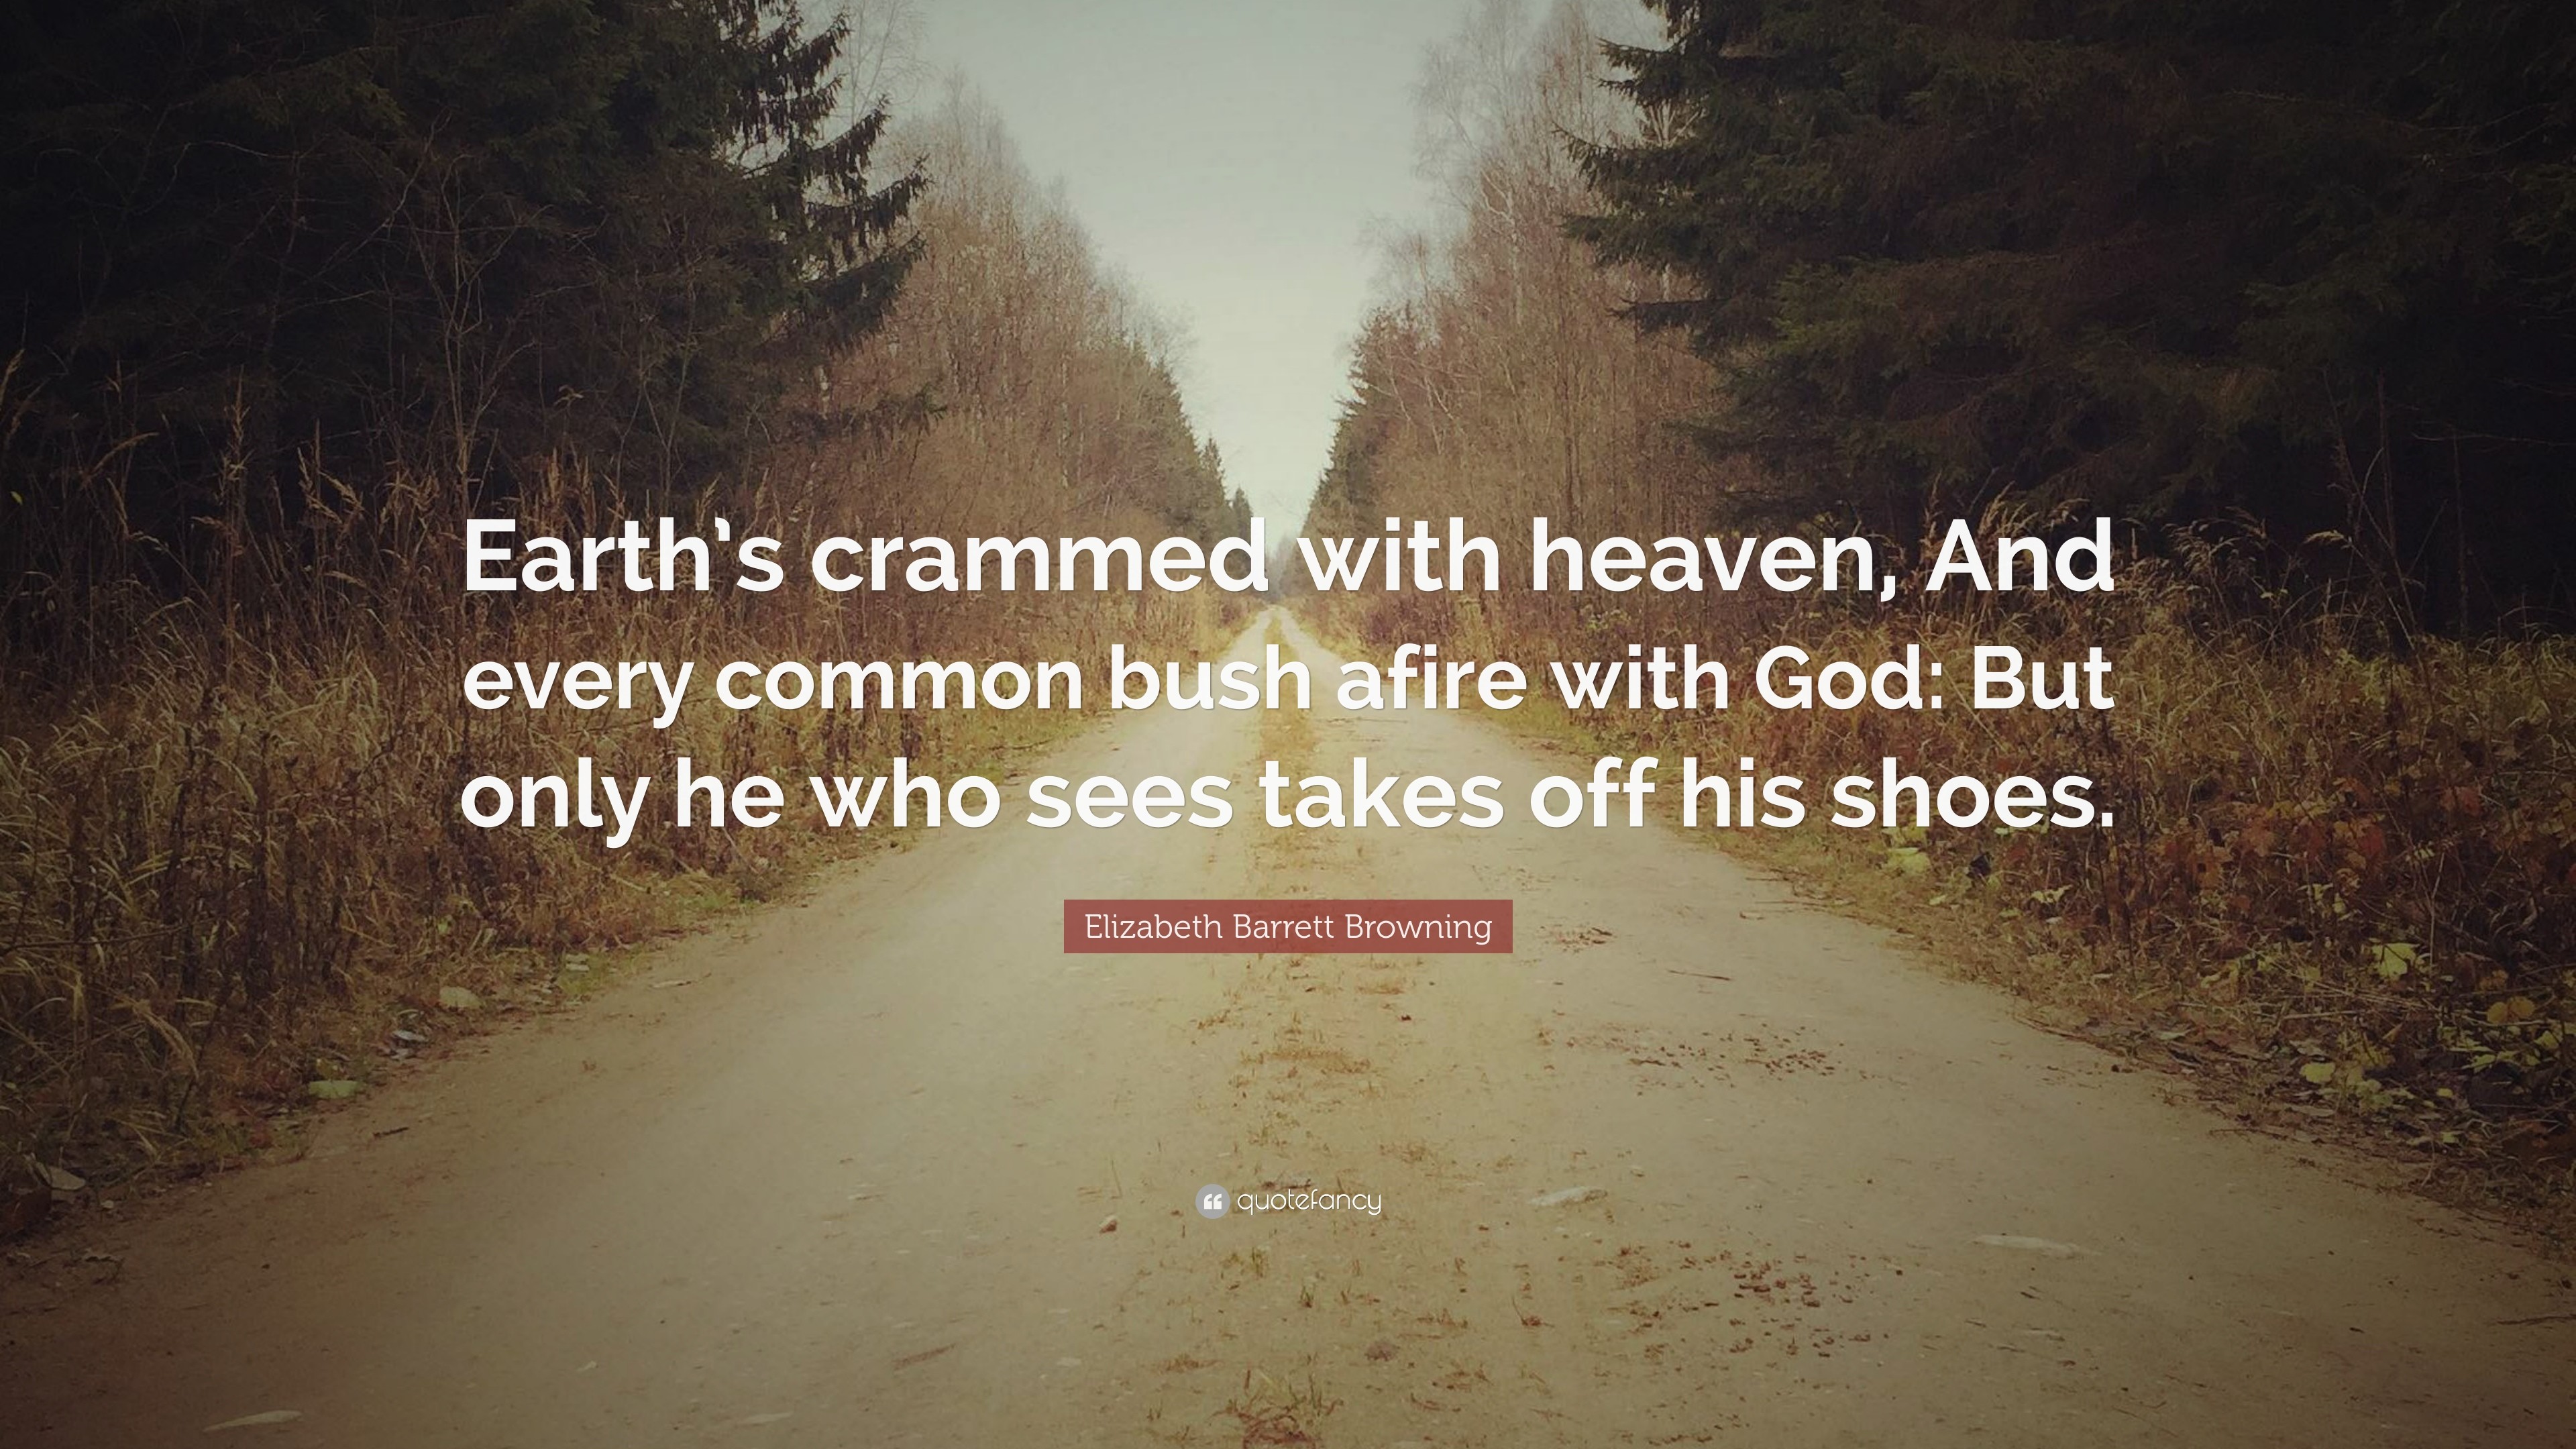 3840x2160 Elizabeth Barrett Browning Quote: “Earth's crammed with heaven, And every  common bush afire